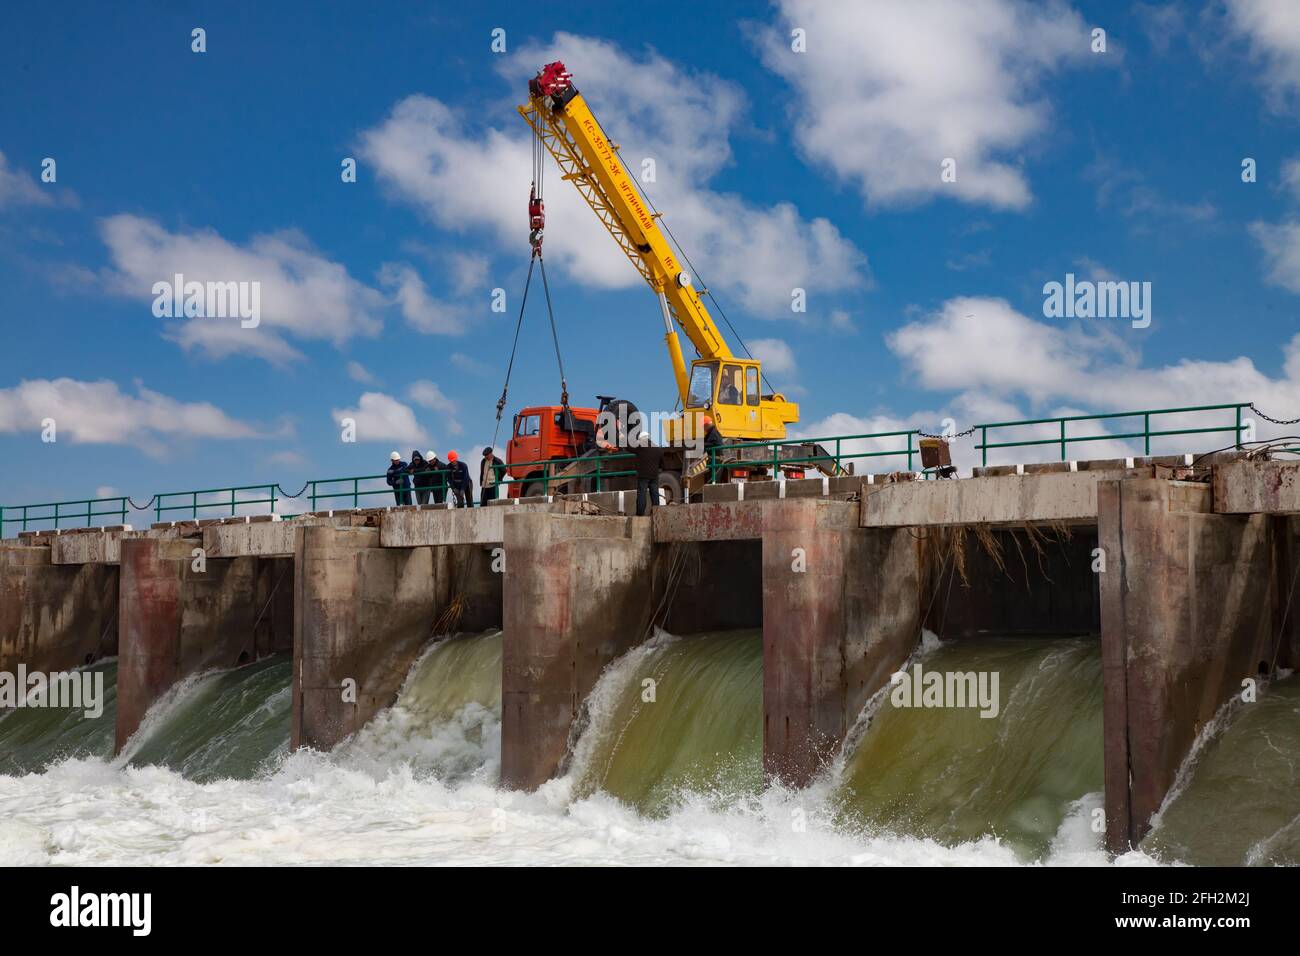 Kok-aral,Kazakhstan: Aral Sea Kok-aral dam. Water discharge in flood. Open shutters. Yellow mobile crane and workers on dam. Stock Photo